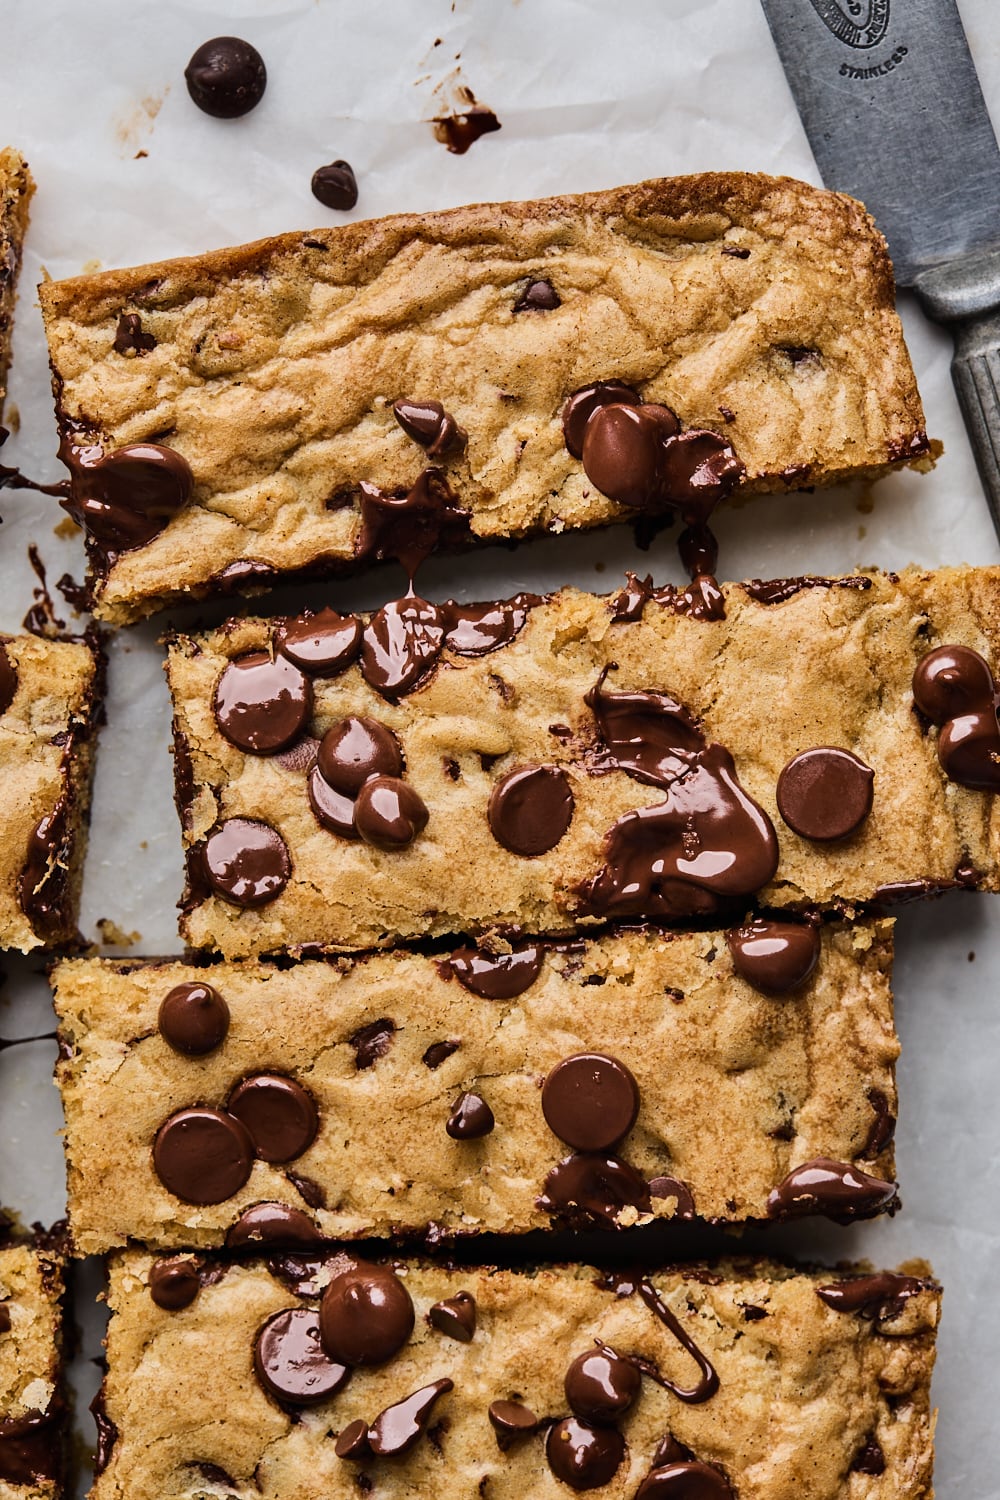 Classic Chocolate Chip Cookie Bars ready to serve